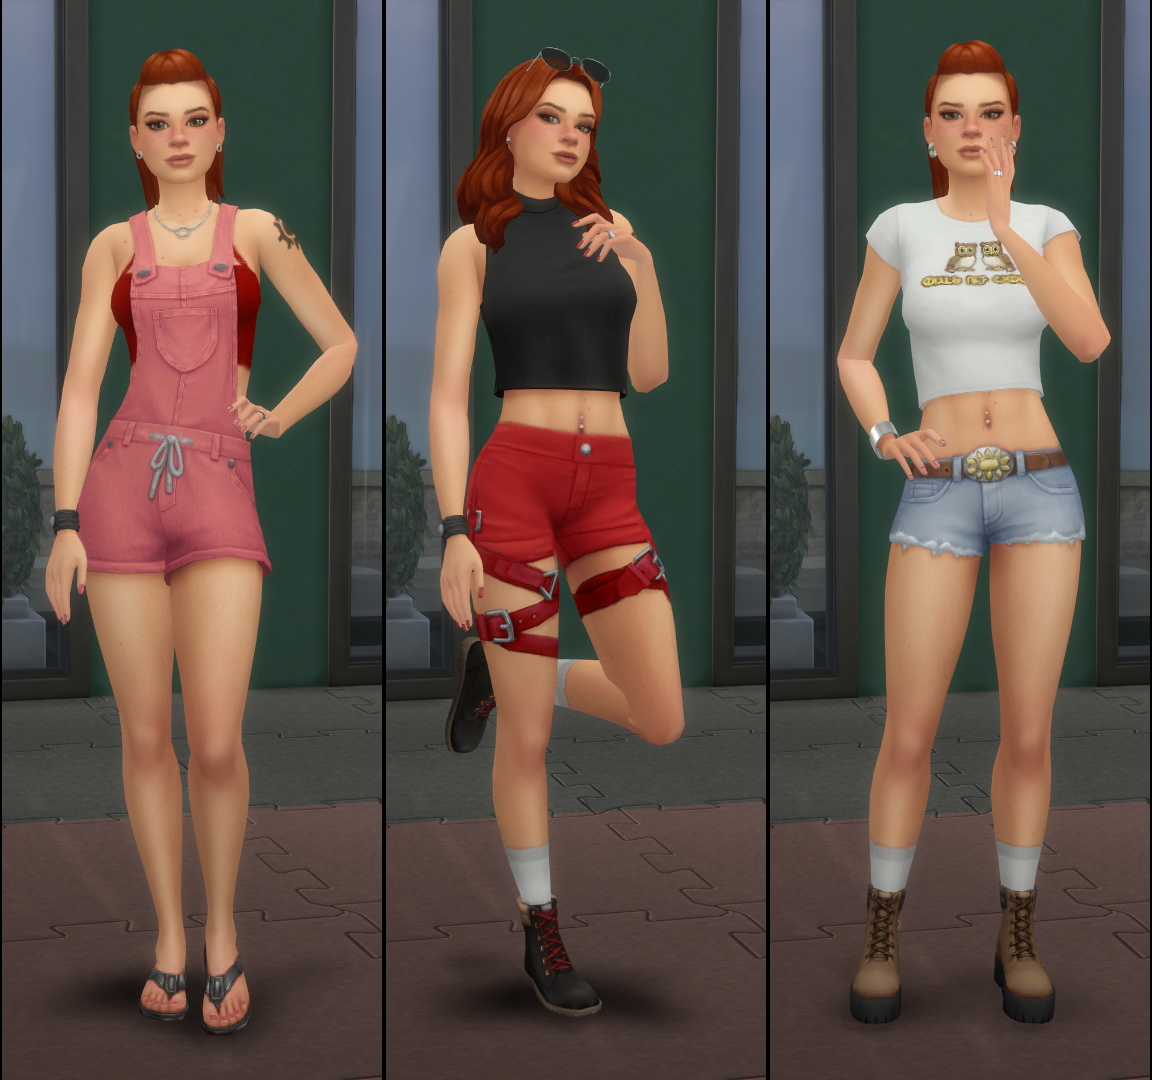 The Sims 4 Bdsm Digital Pictures Downloads